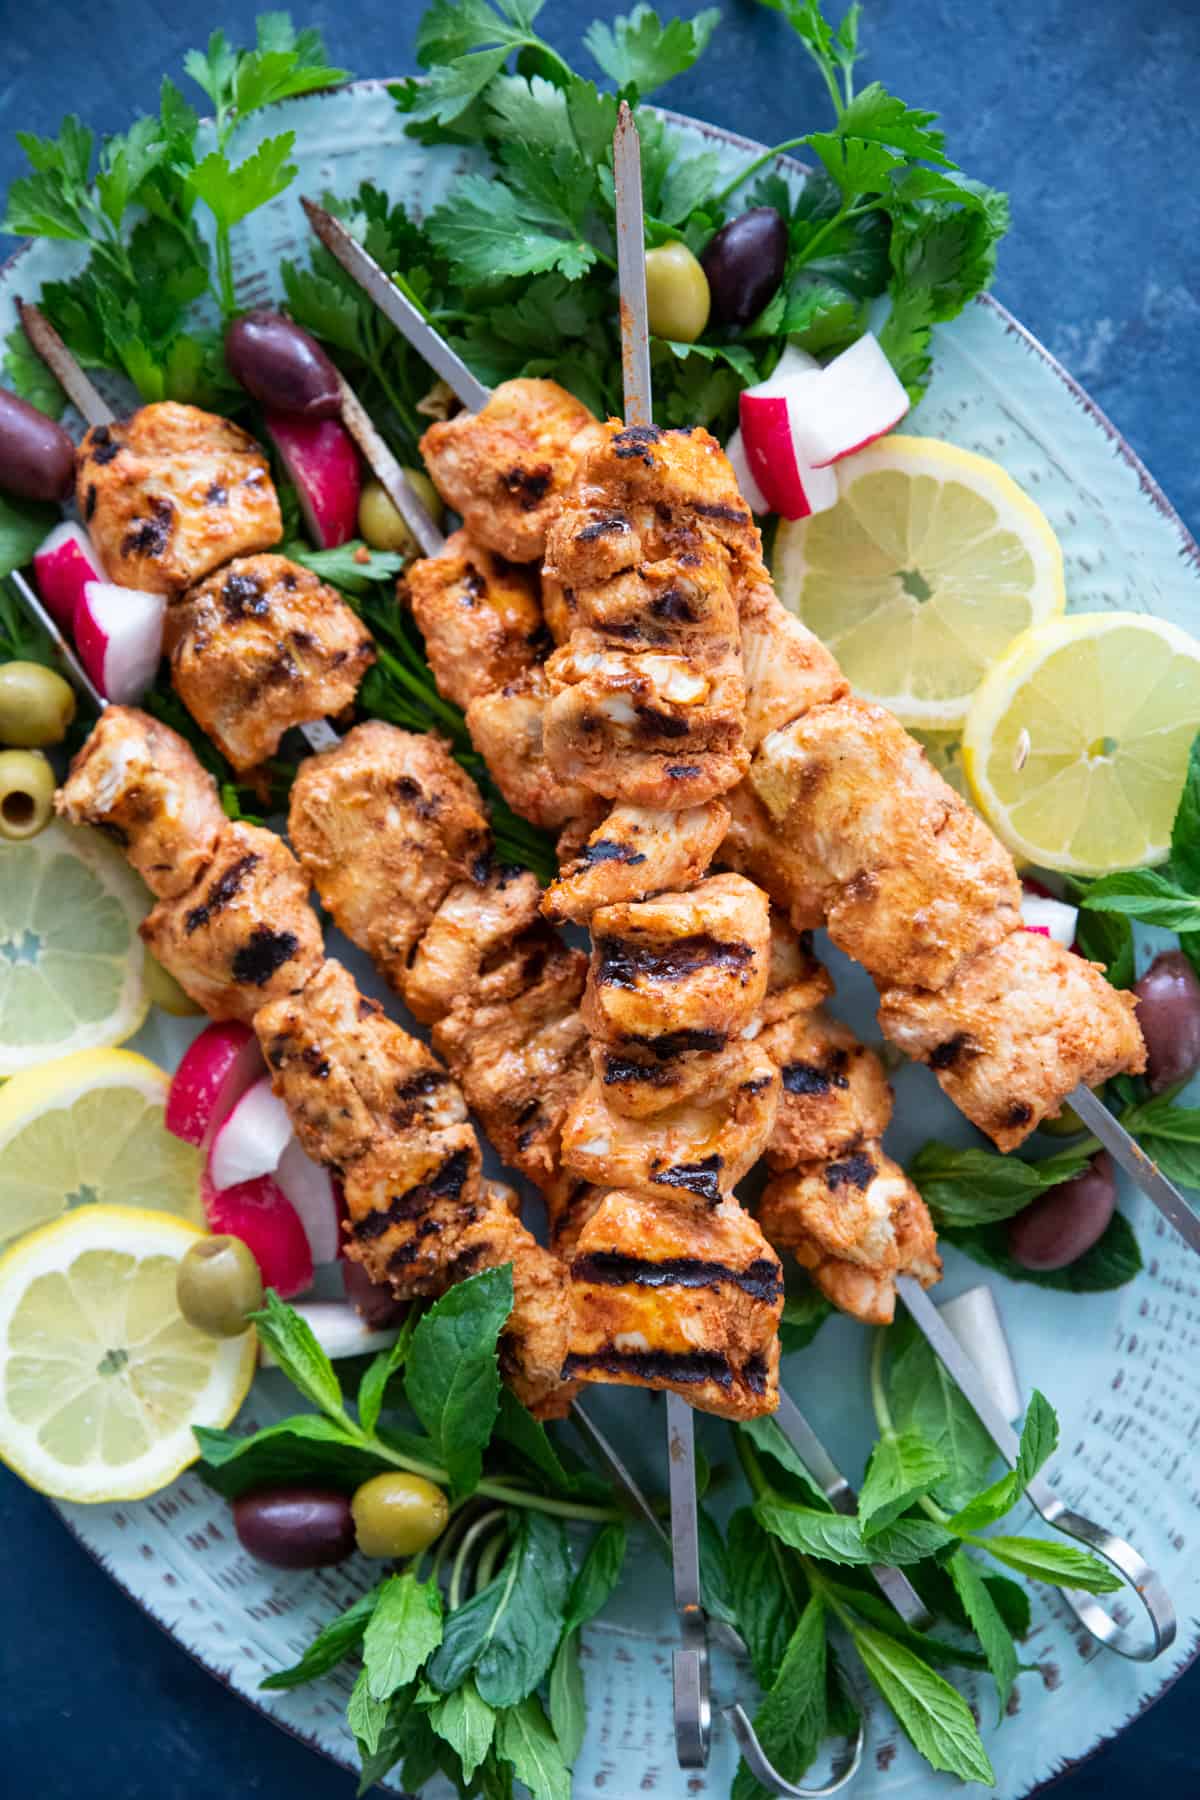 These juicy grilled chicken kabobs are a staple of Mediterranean and Middle Eastern cooking. I've marinated these cubes of chicken in Mediterranean spices and grilled them to perfection. You can easily double or triple this recipe to feed a crowd!
